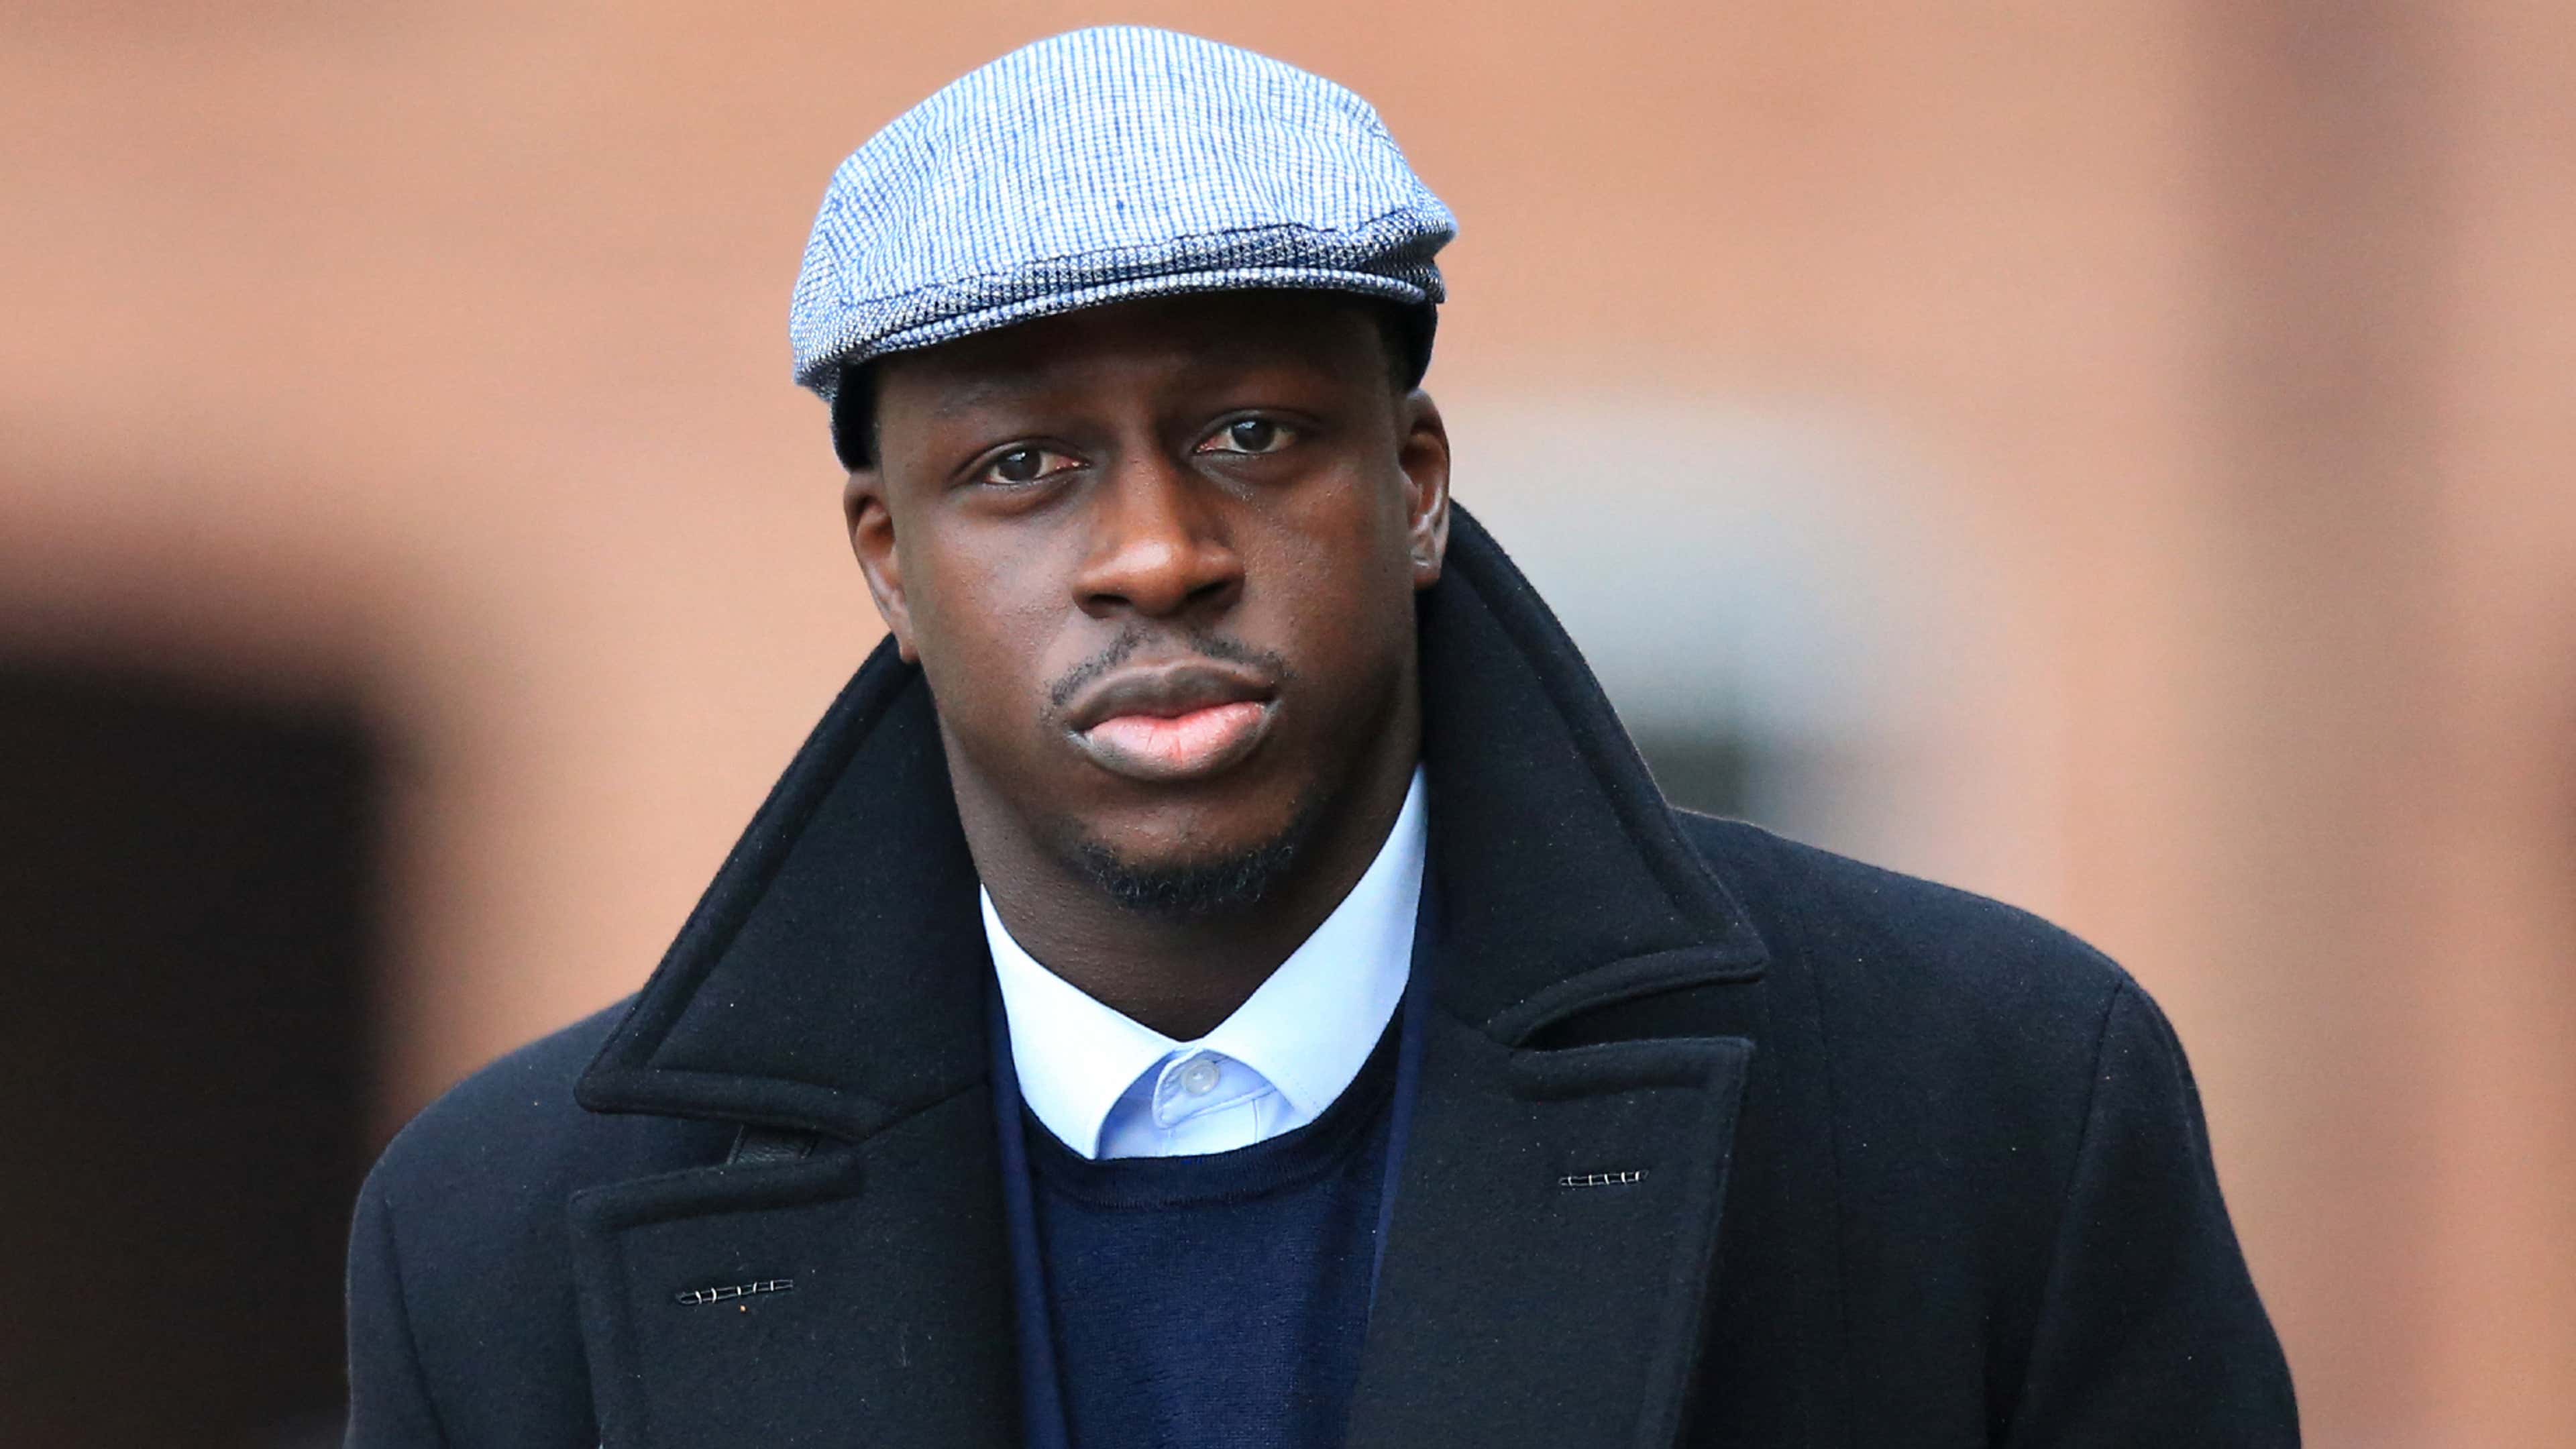 Benjamin Mendy sues Man City for up to £10m in unpaid wages after his  former club stopped paying his £100,000-a-week salary when defender was  charged with rape and sexual assault before being